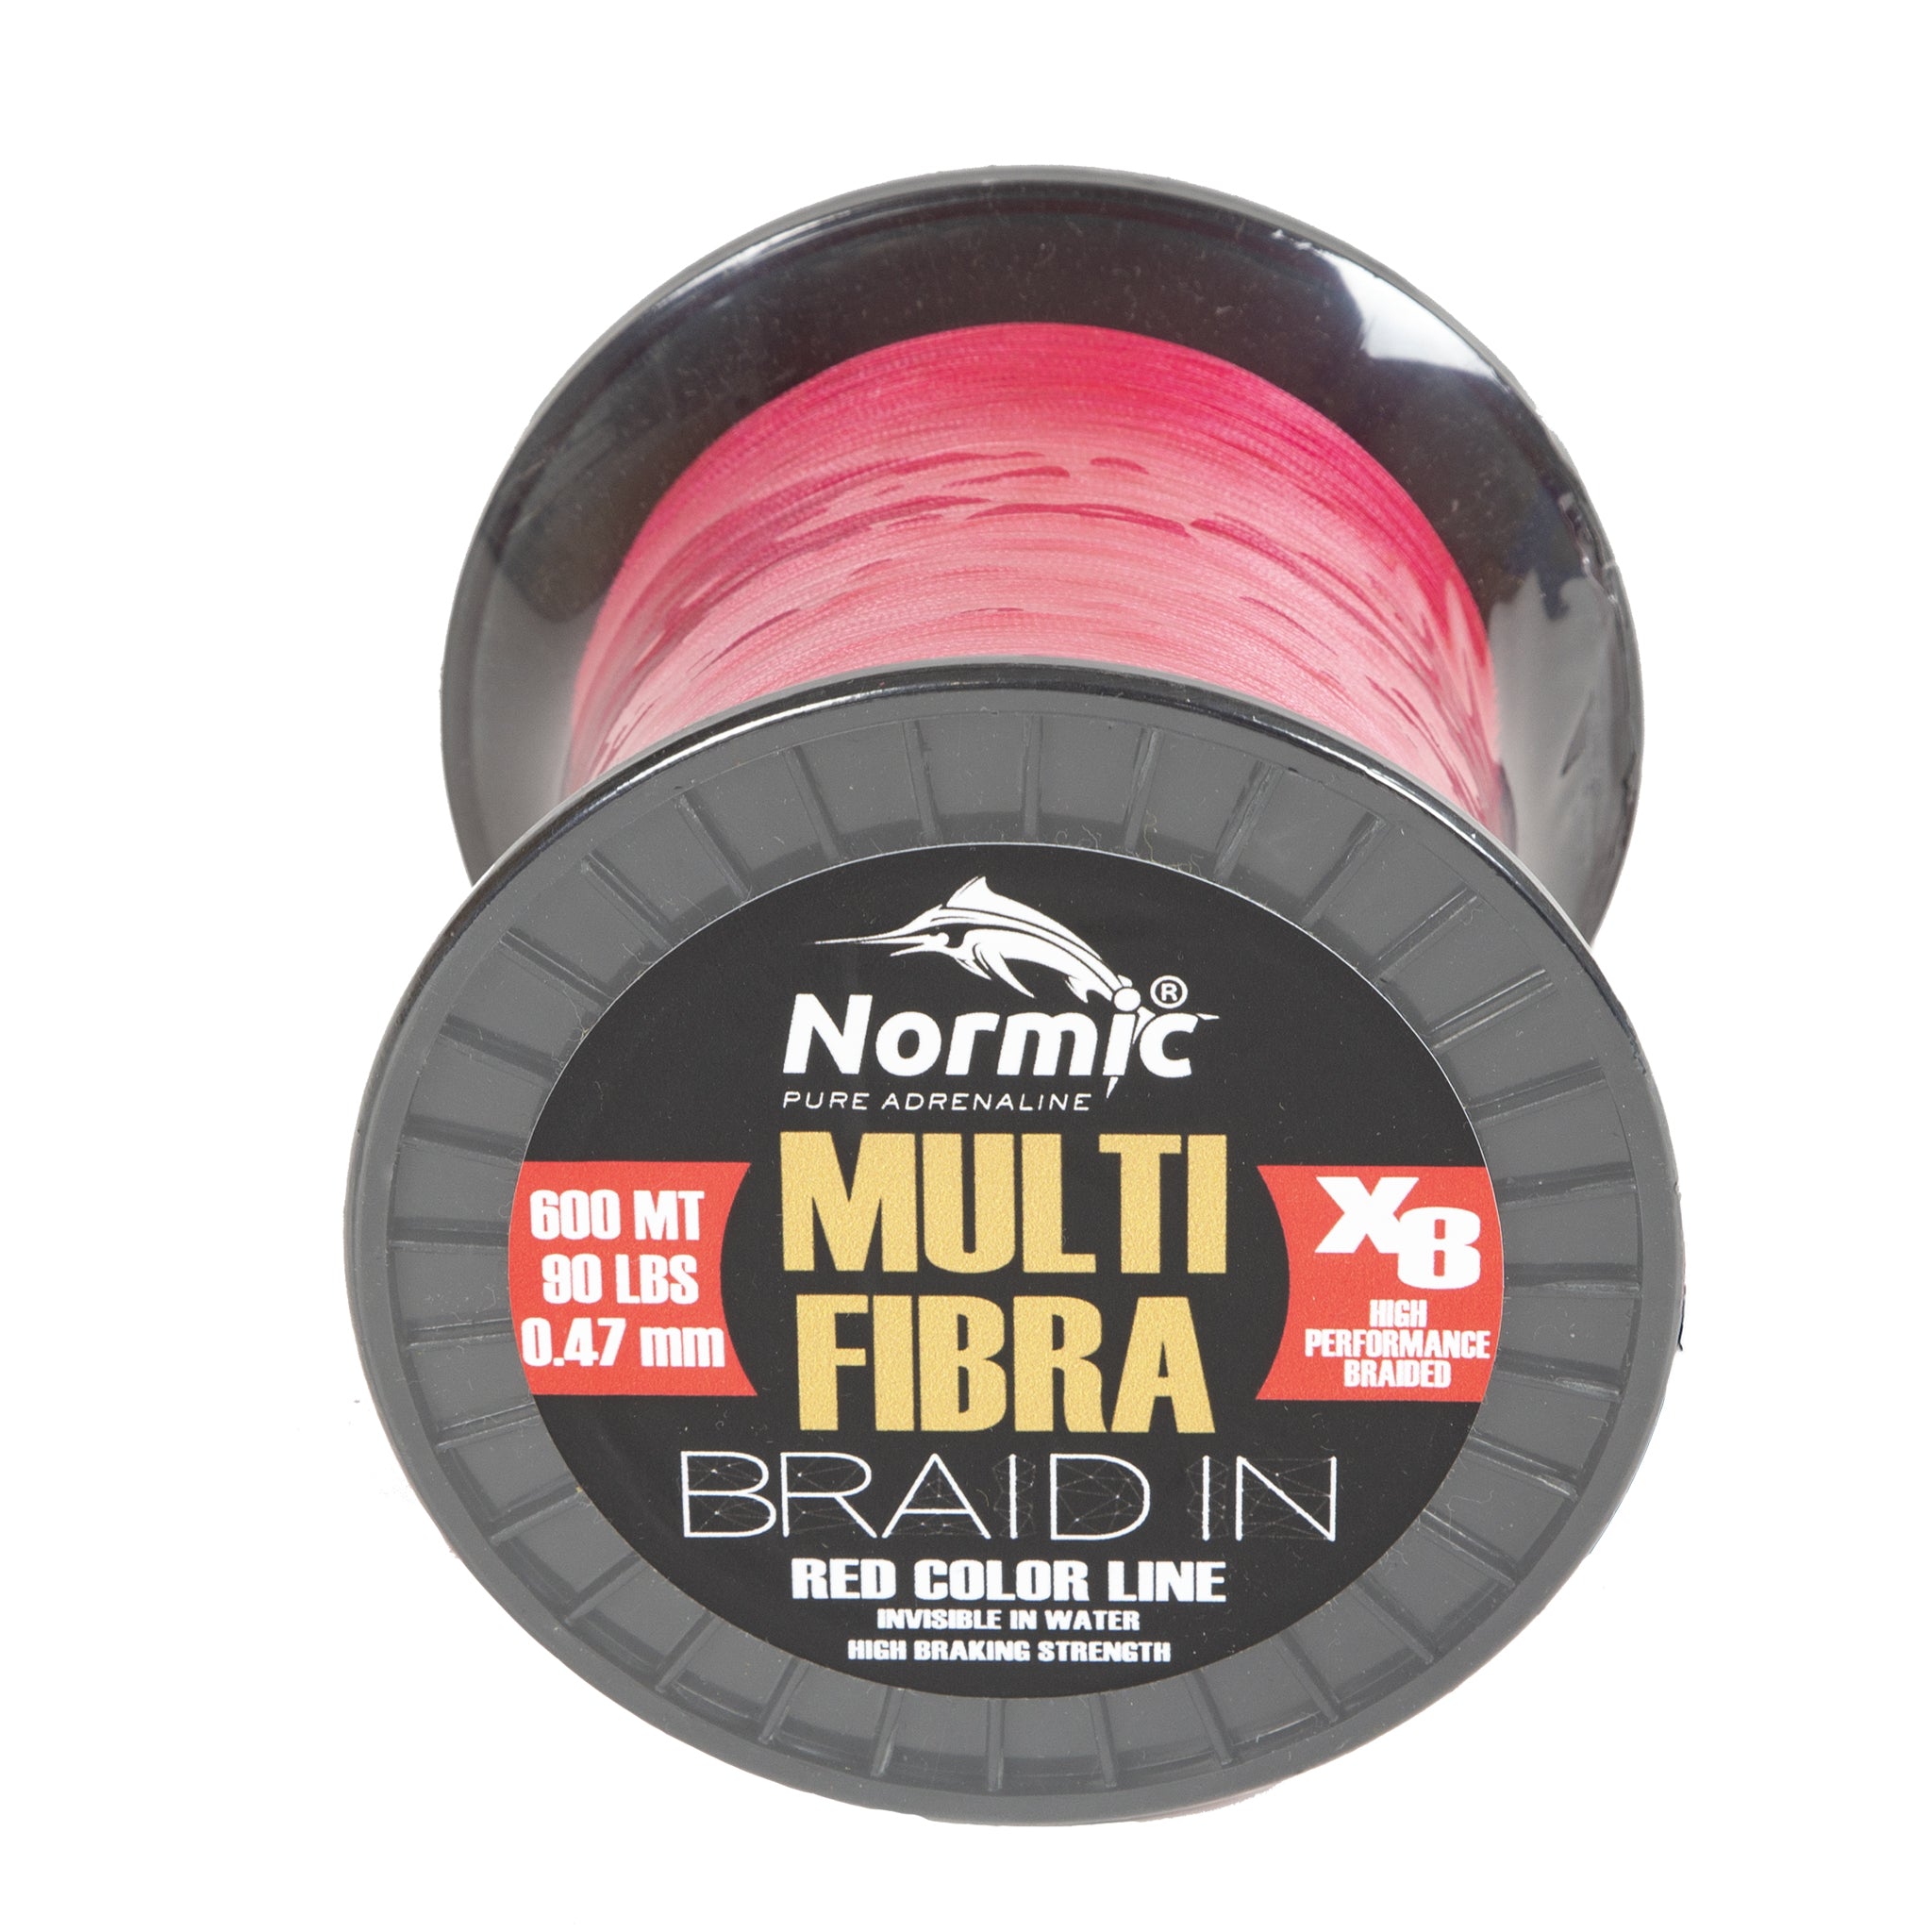 Multifibre Braid In - Fishing Wire Competitions - High Resistance 